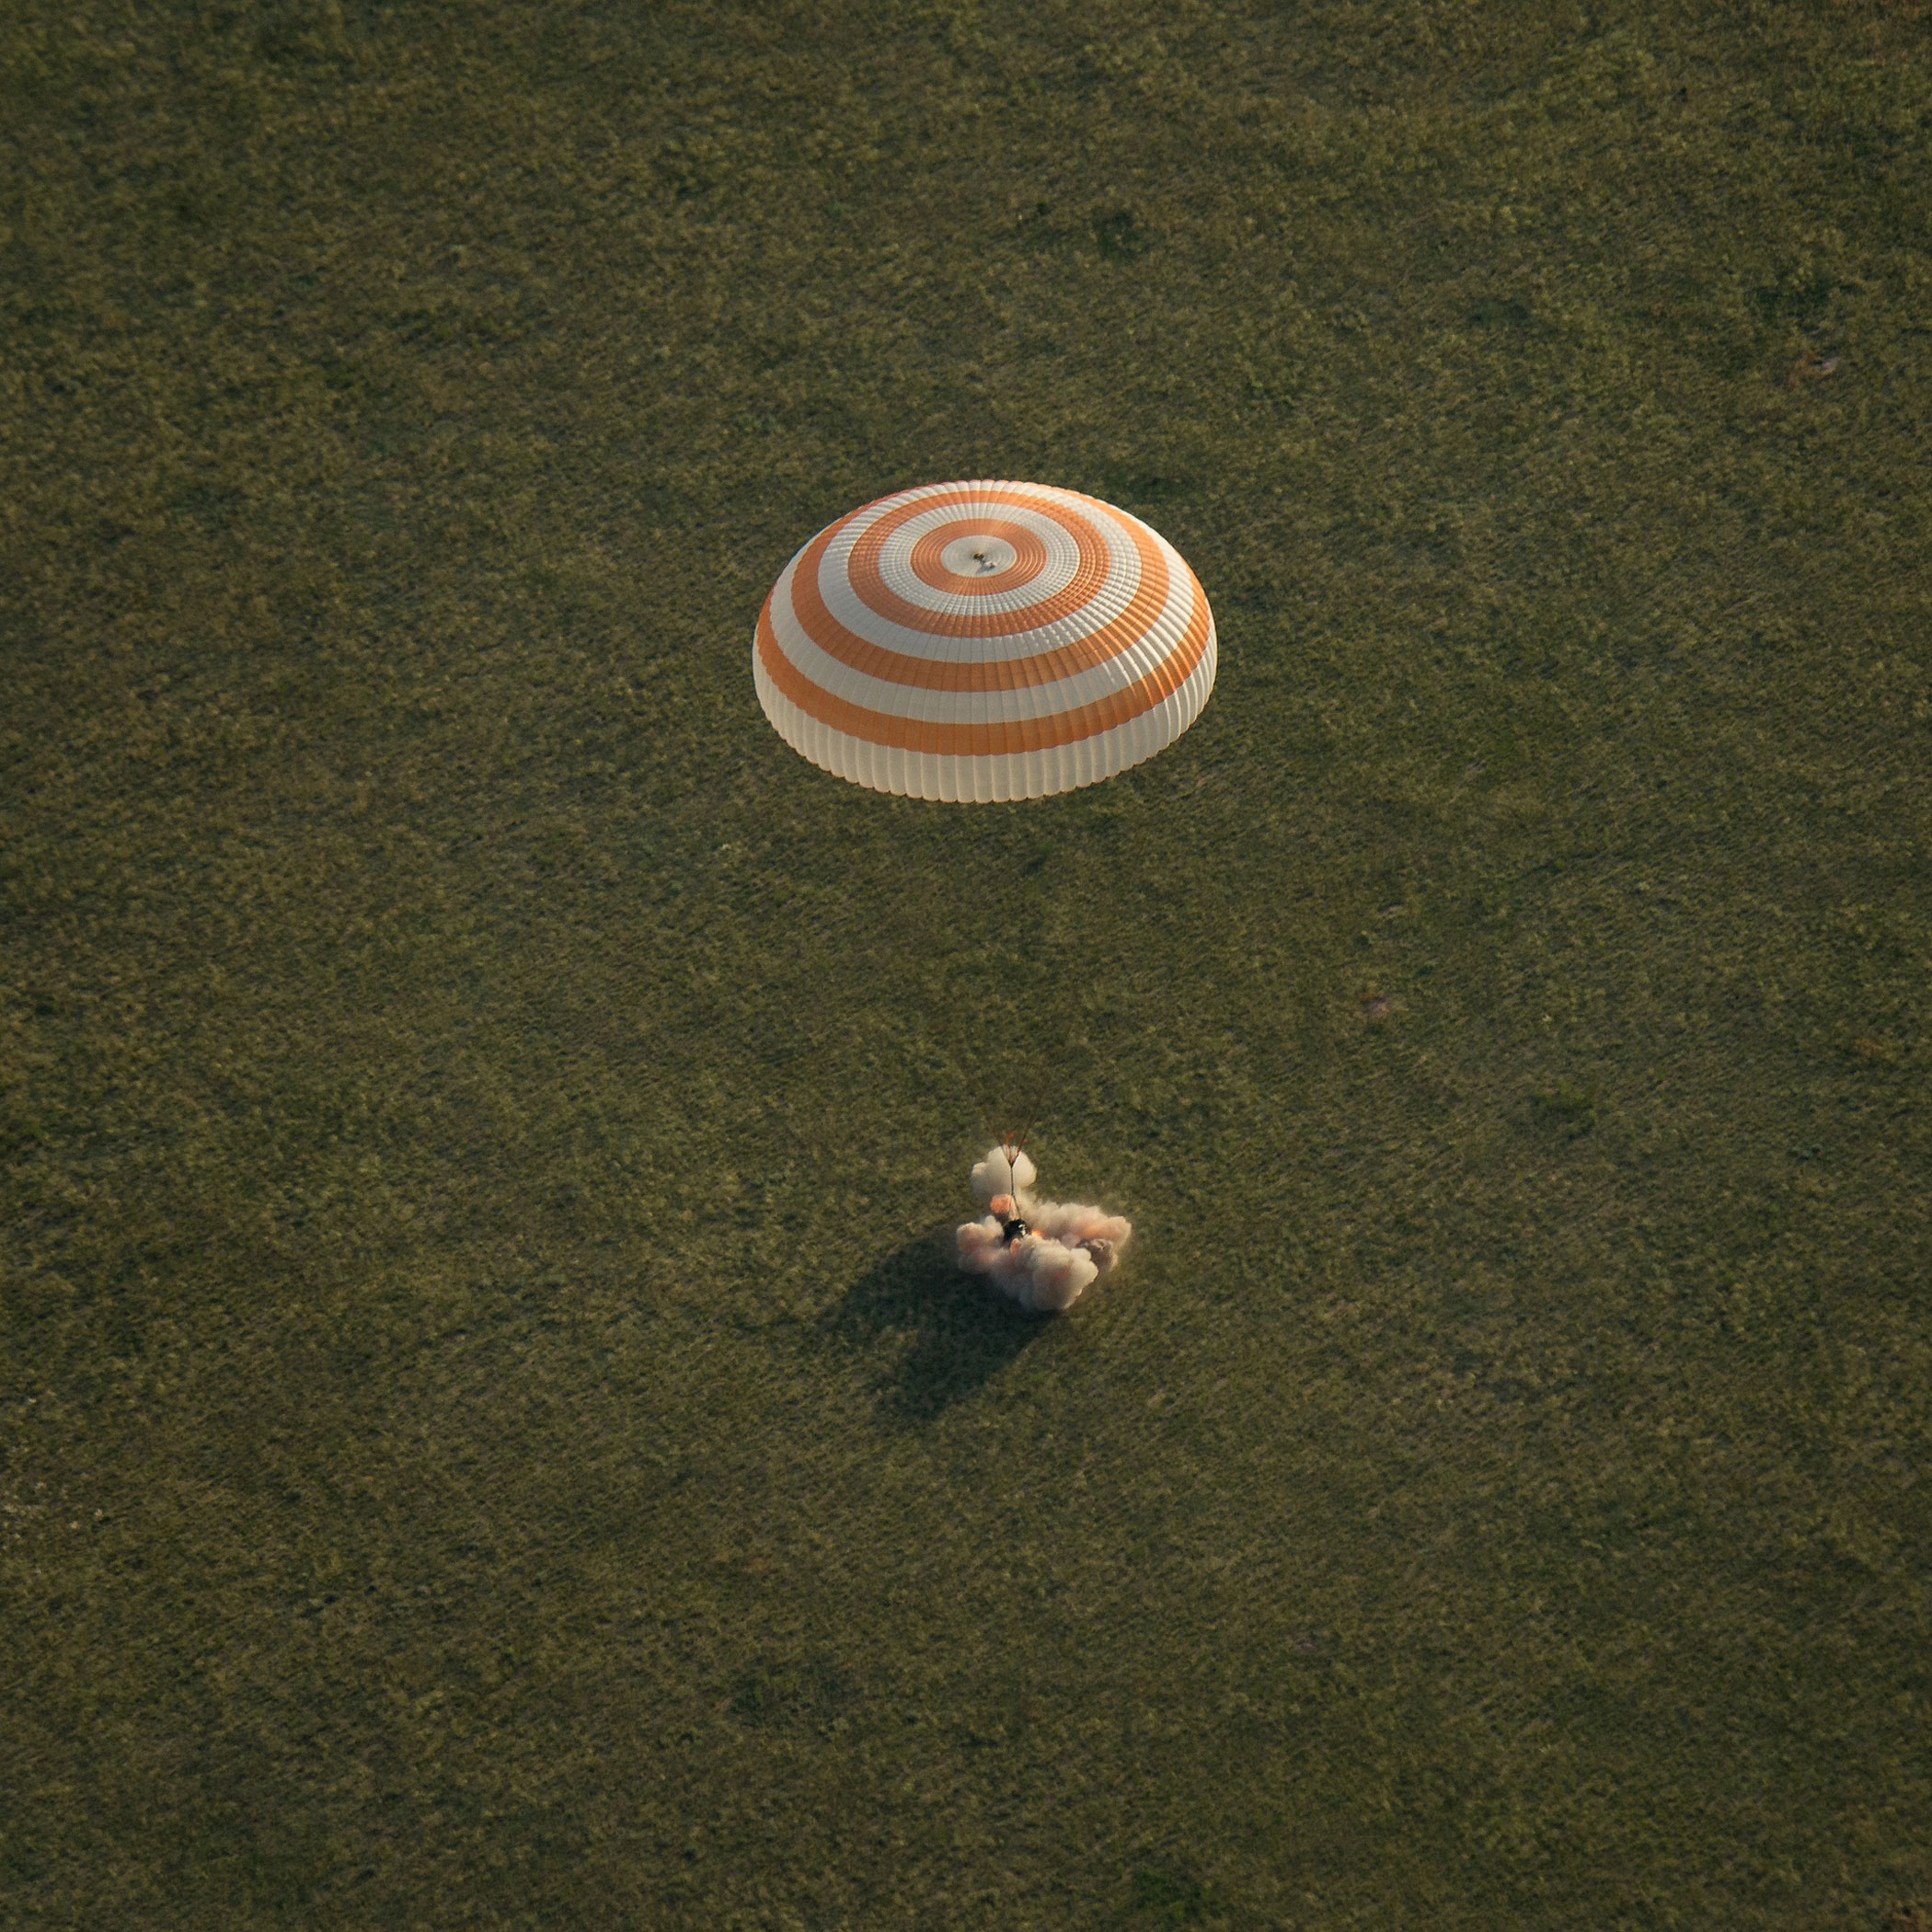 The Soyuz TMA-15M spacecraft is seen as it lands with Expedition 43 commander Terry Virts of NASA, cosmonaut Anton Shkaplerov of the Russian Federal Space Agency (Roscosmos), and Italian astronaut Samantha Cristoforetti from European Space Agency (ESA) near the town of Zhezkazgan, Kazakhstan on June 11, 2015.